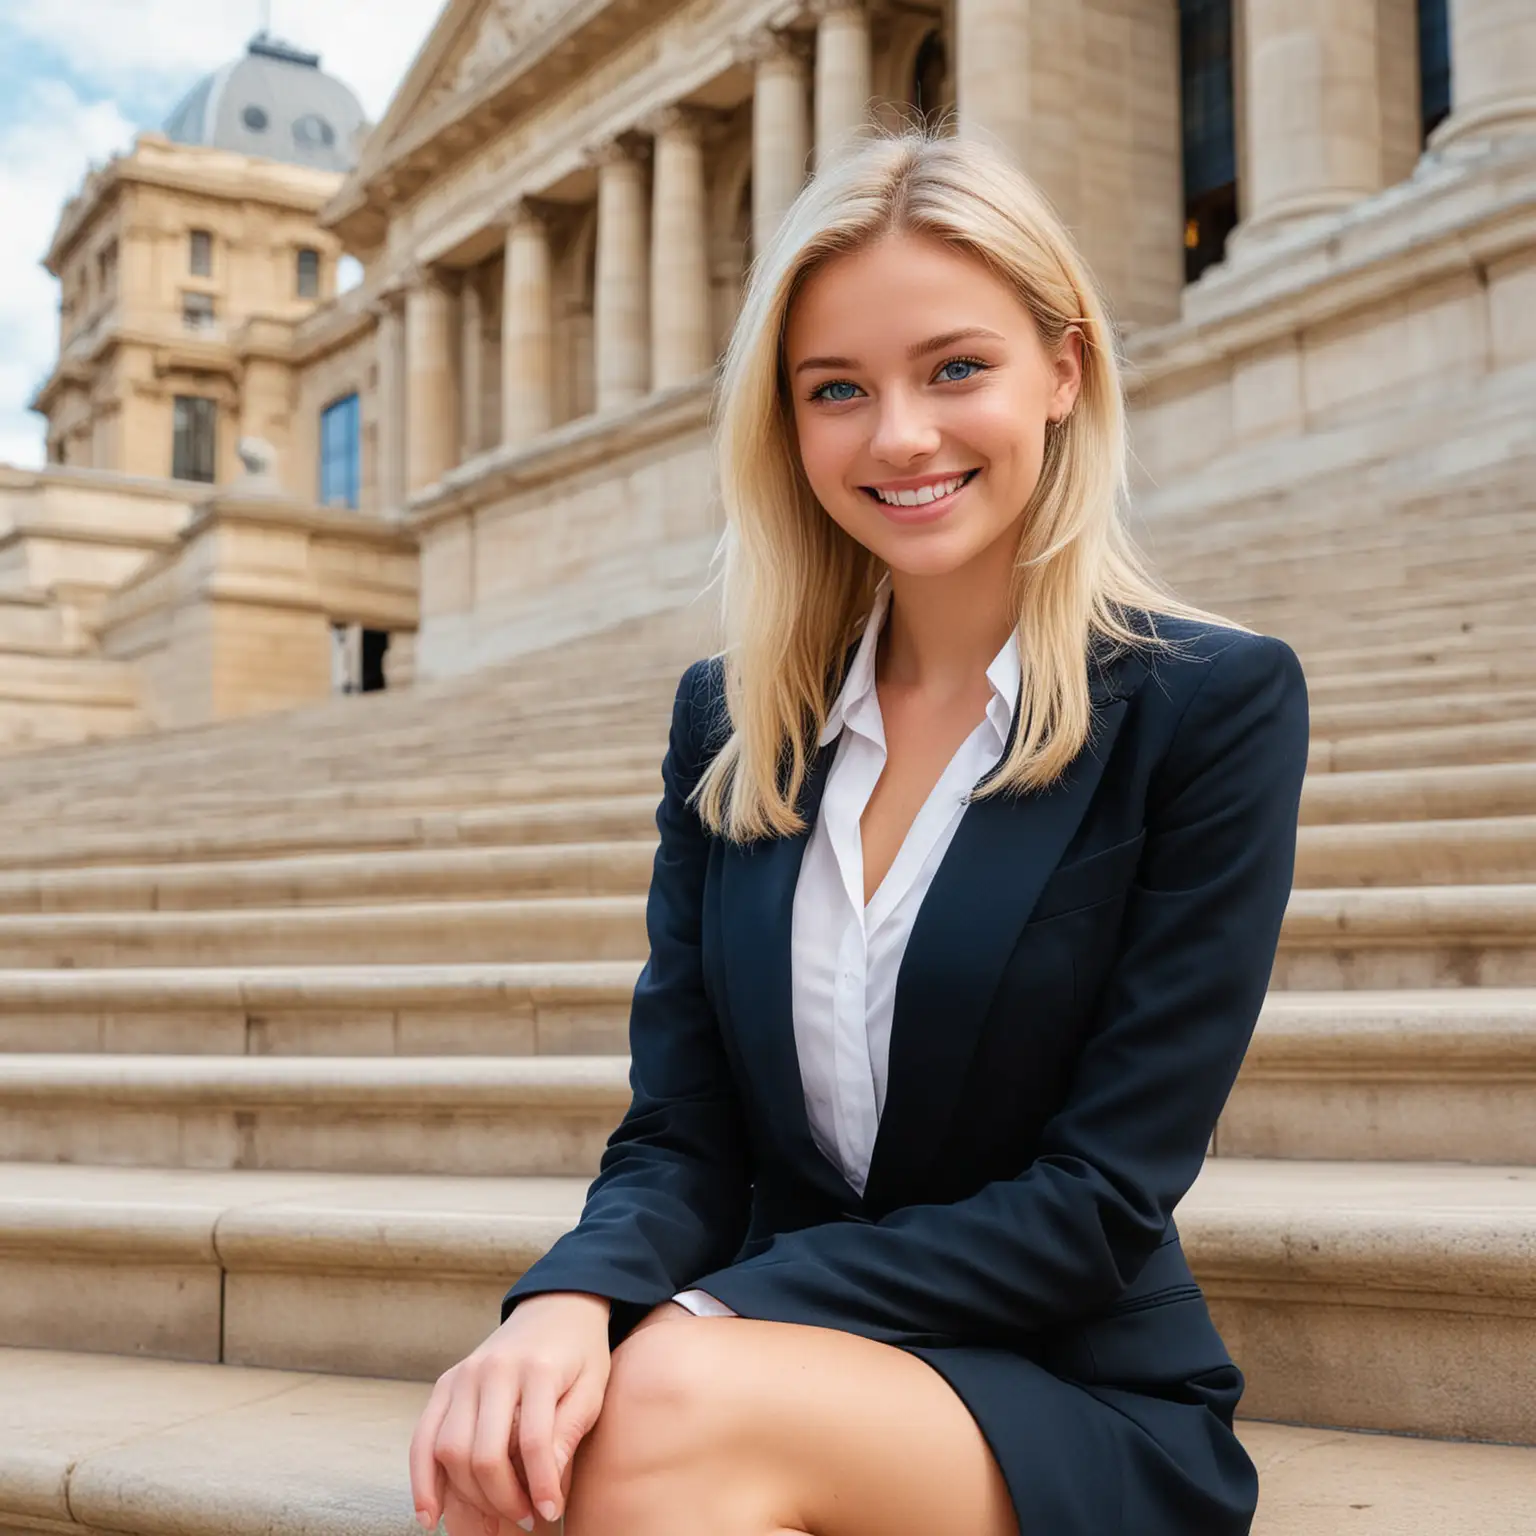 A 20-year-old girl in office attire with blonde hair, blue eyes, a smile that flawless and the body of a supermodel sitting on the steps in front of the opera house in Sydney